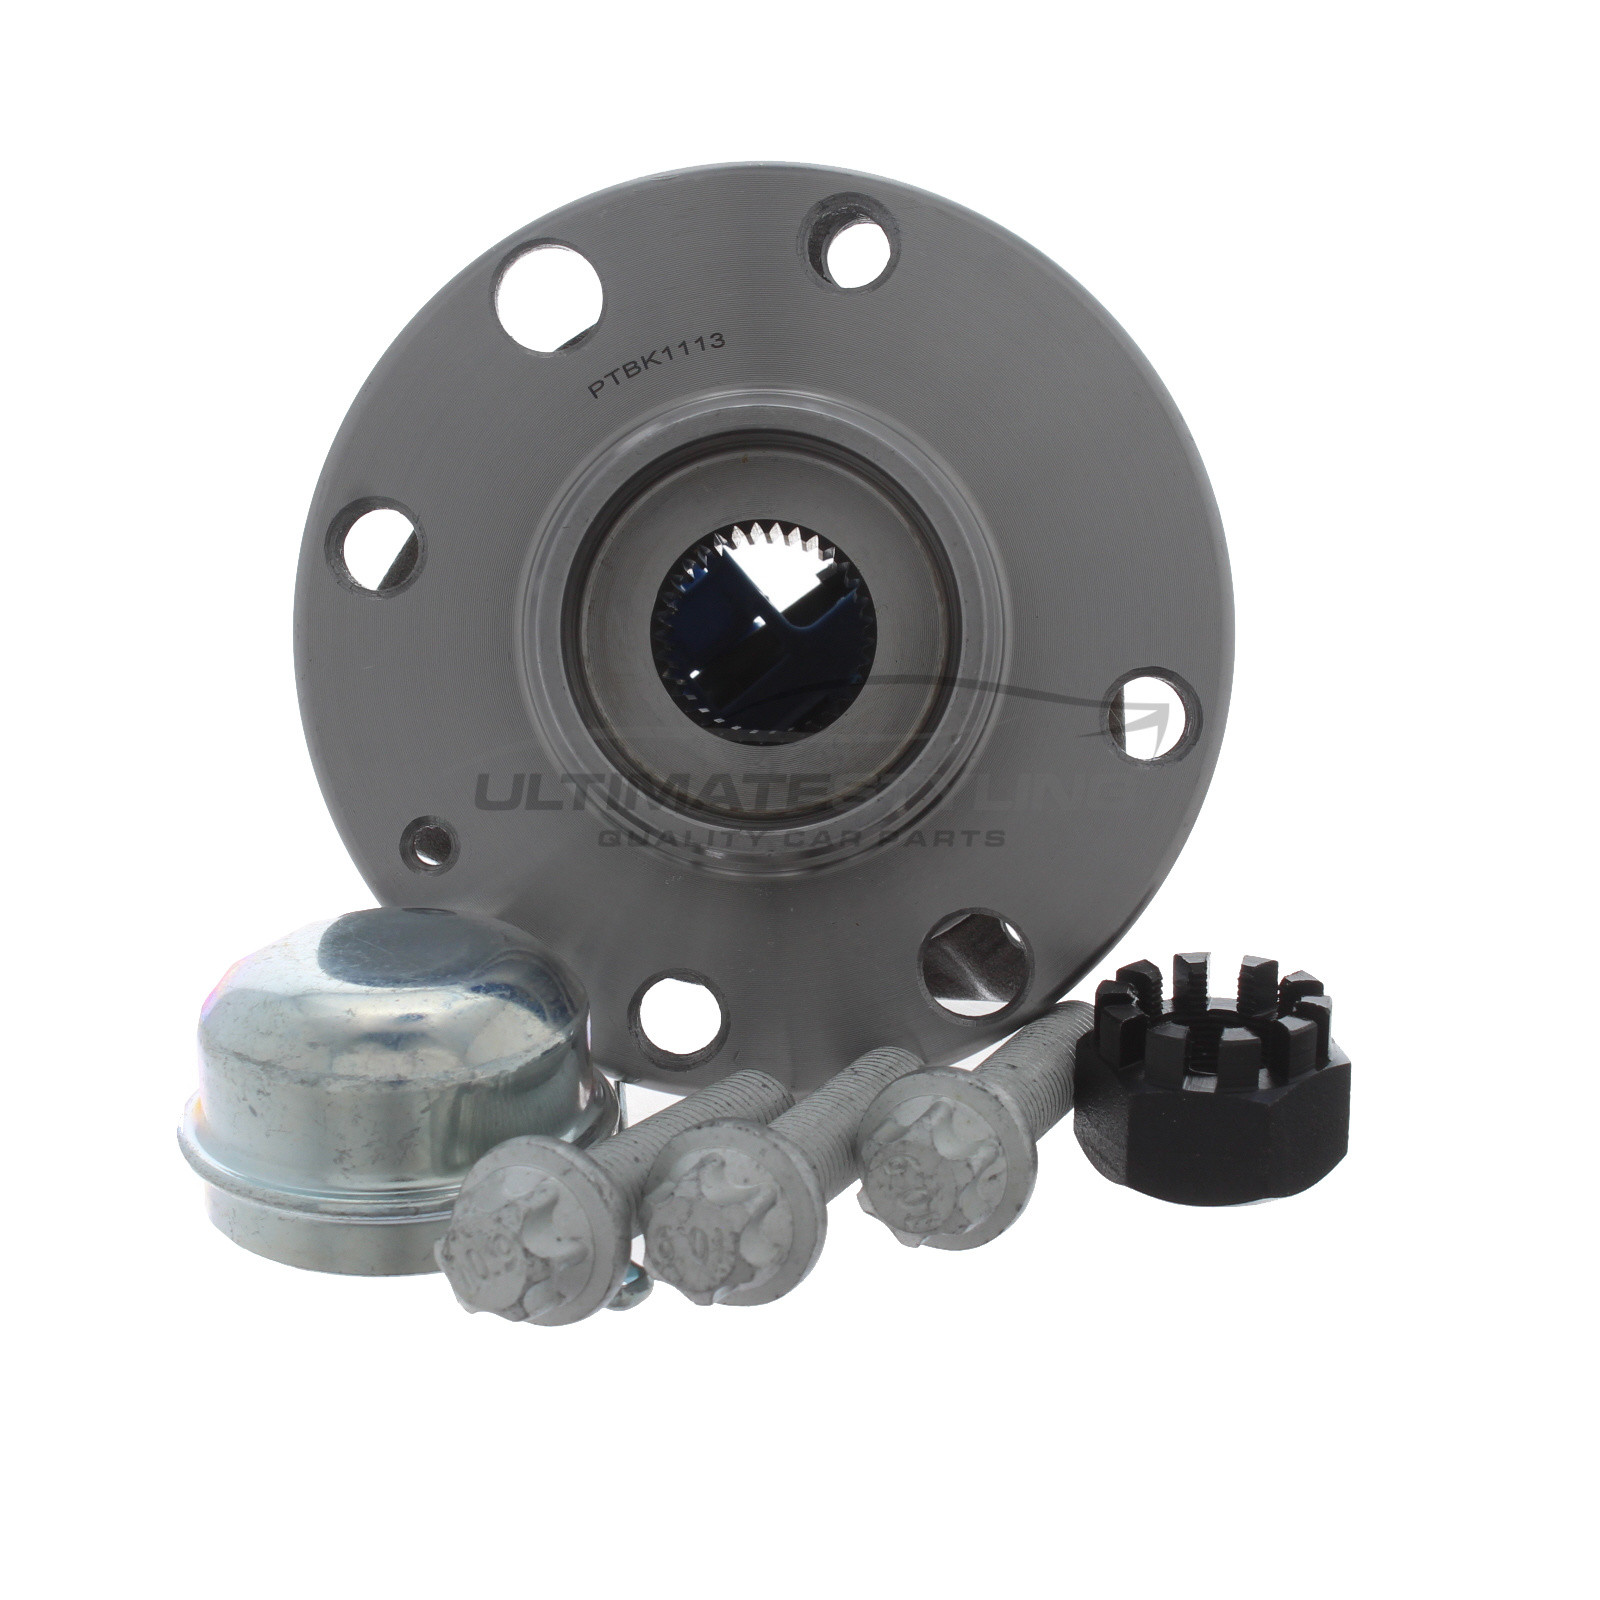 Front <span style="color:red;"><strong>OR</strong></span> Rear Hub Bearing Kit for Lotus Elise